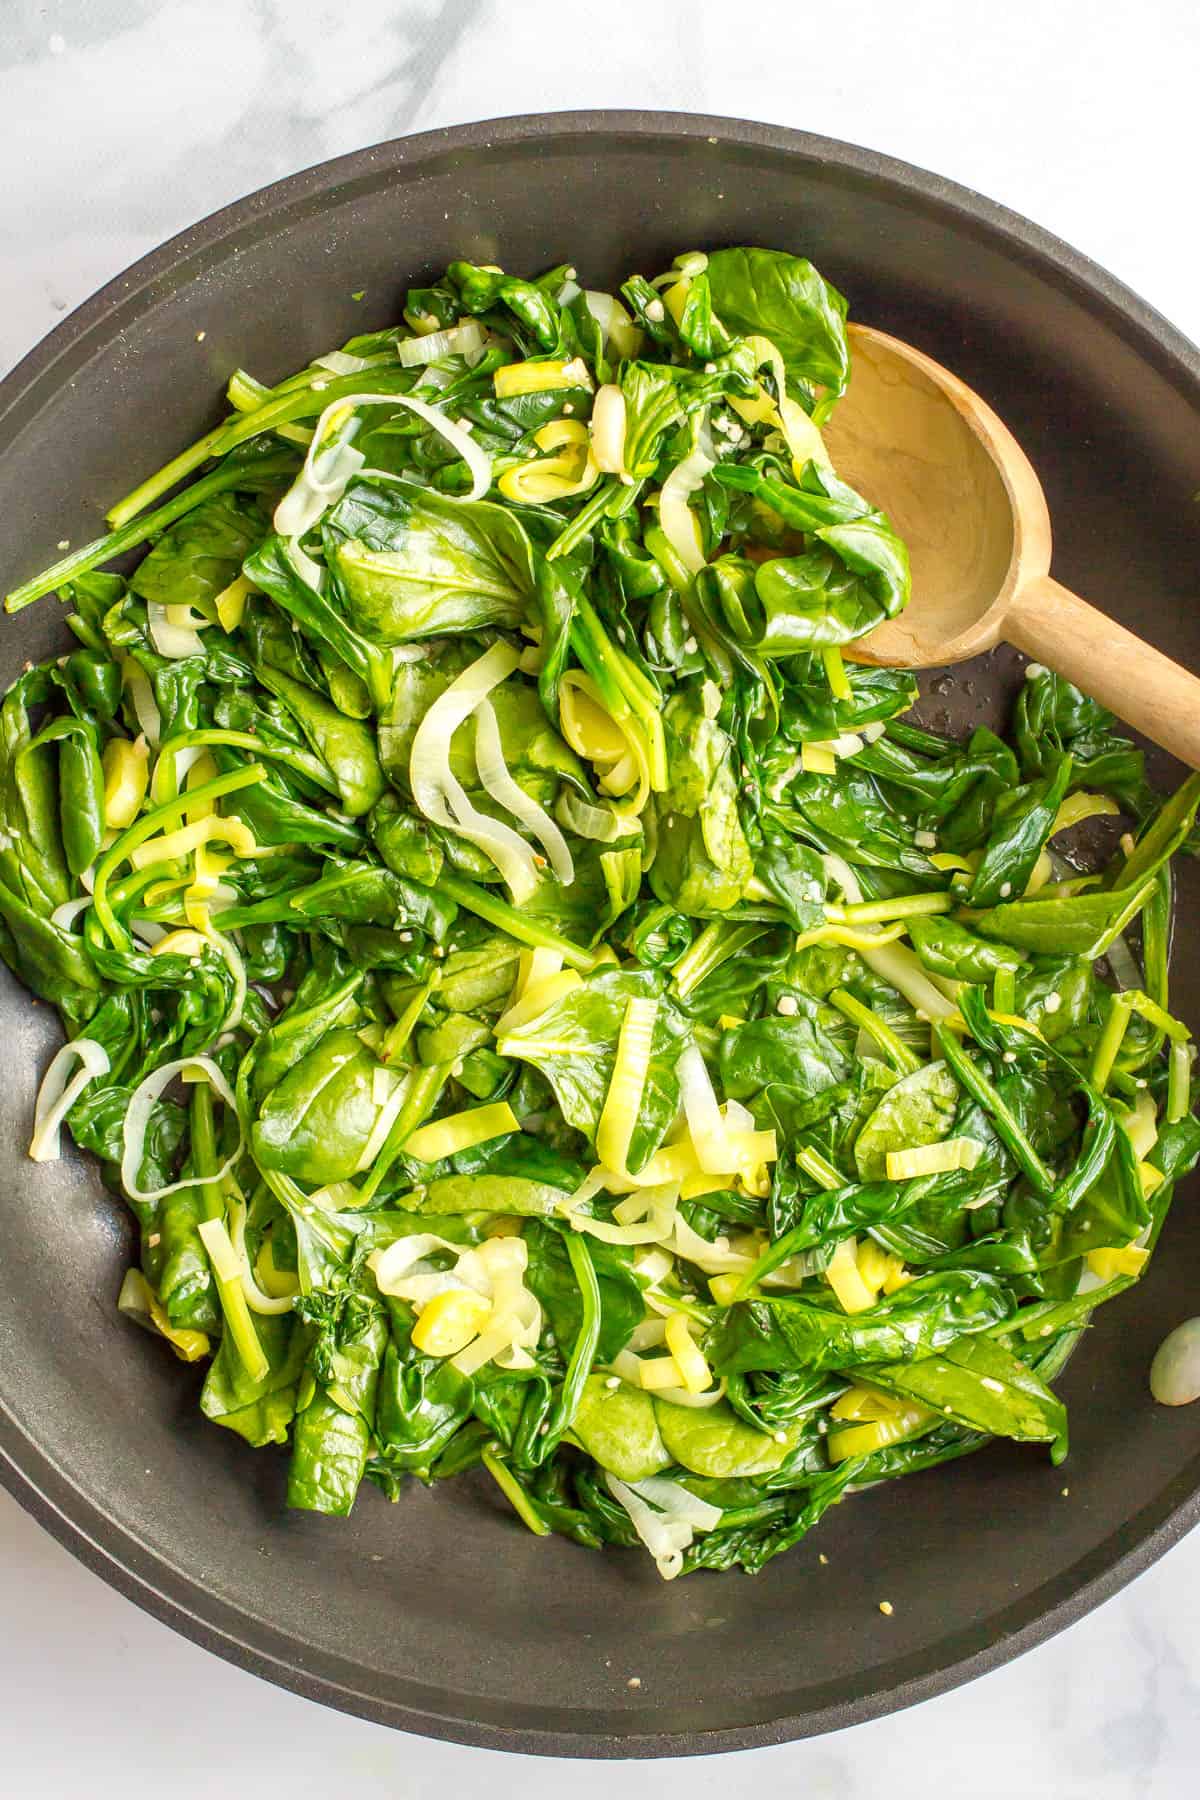 A wooden spoon scooping up some spinach and leeks from a large dark skillet.